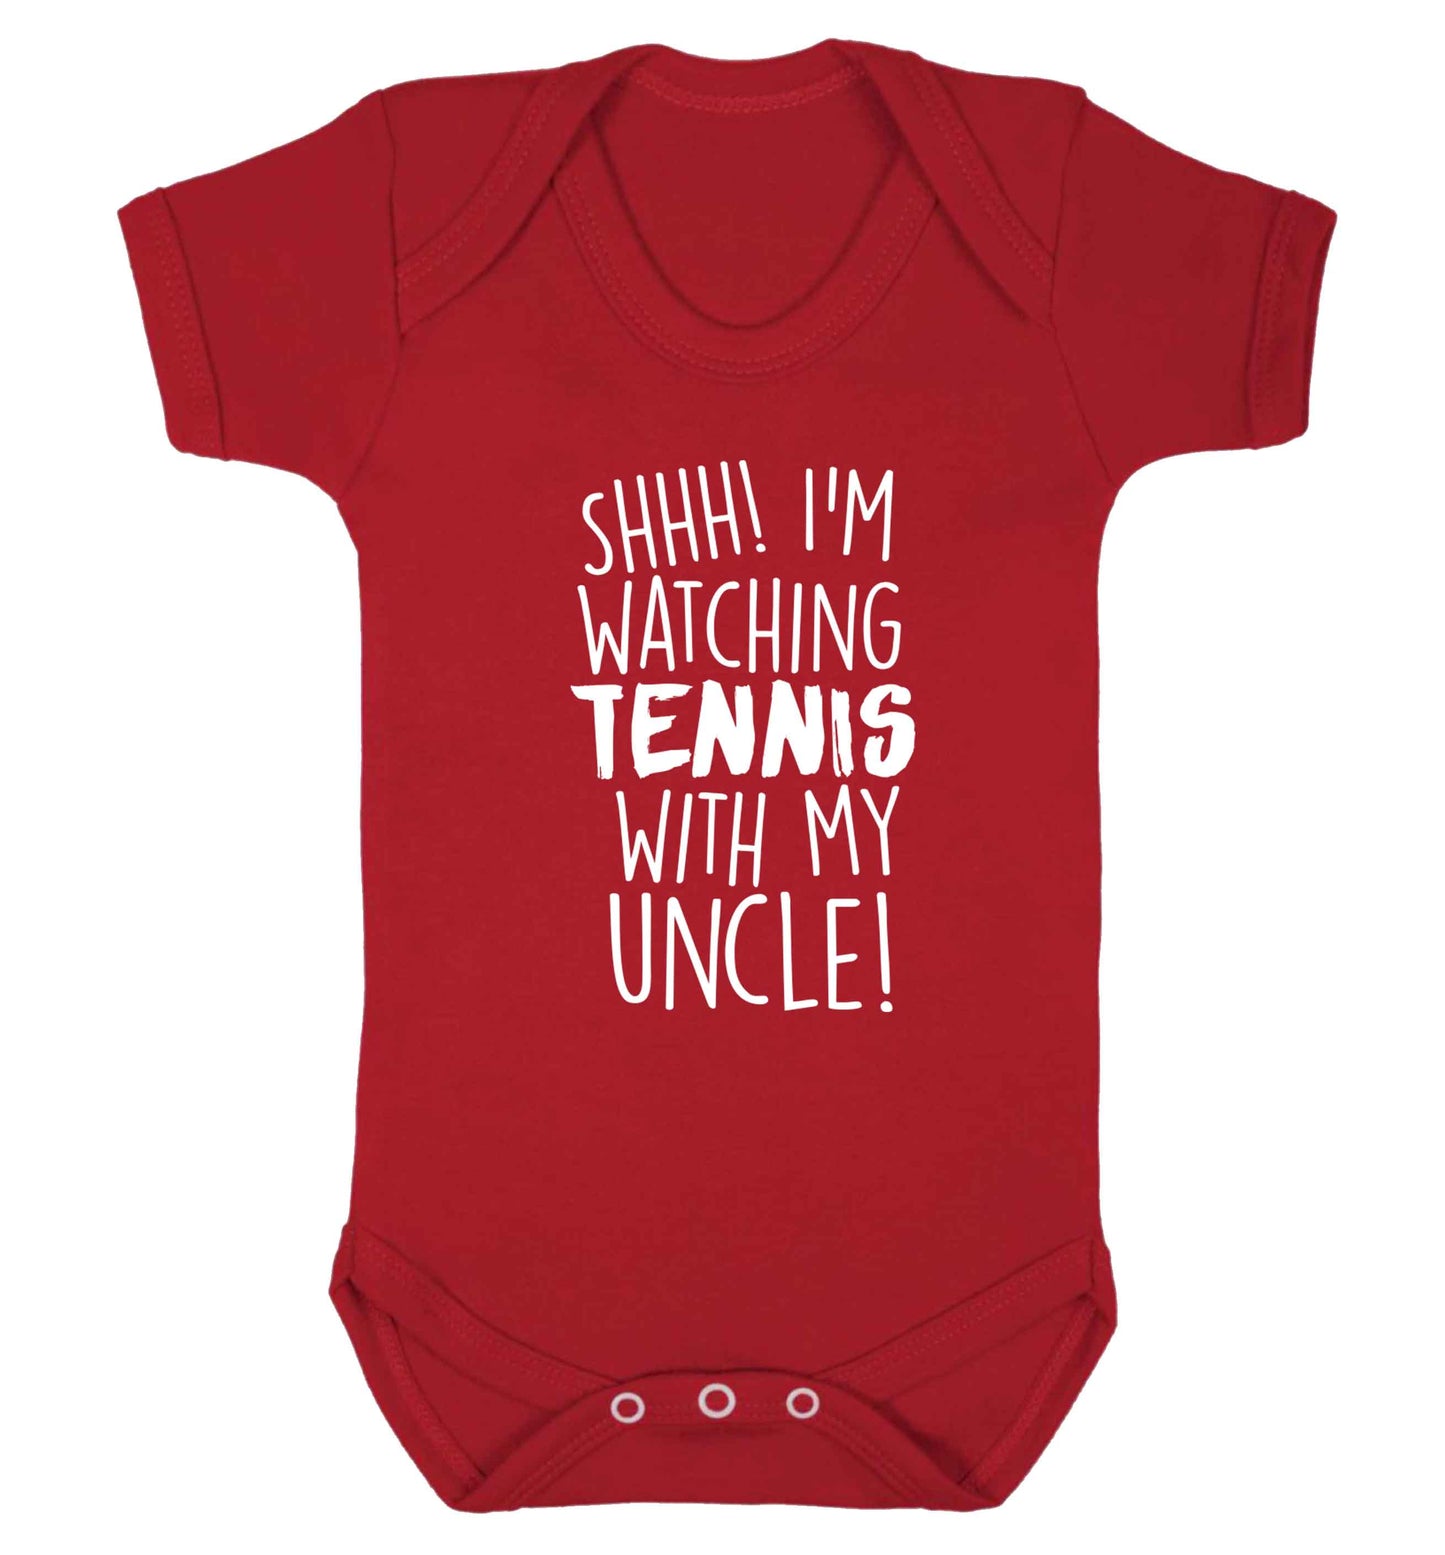 Shh! I'm watching tennis with my uncle! Baby Vest red 18-24 months